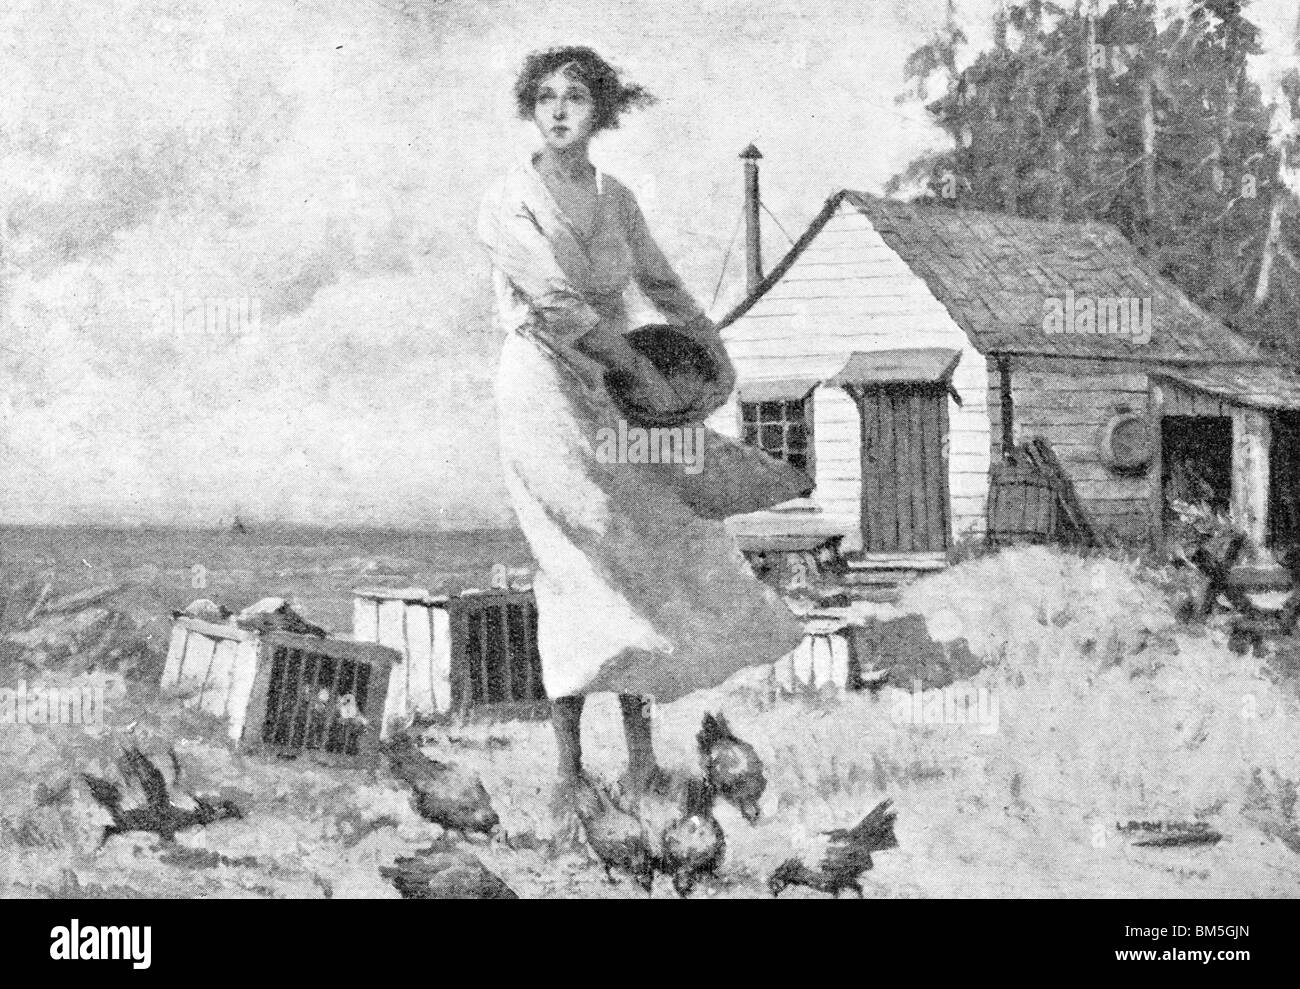 A Windy Day - Woman Feeding the Chickens Stock Photo